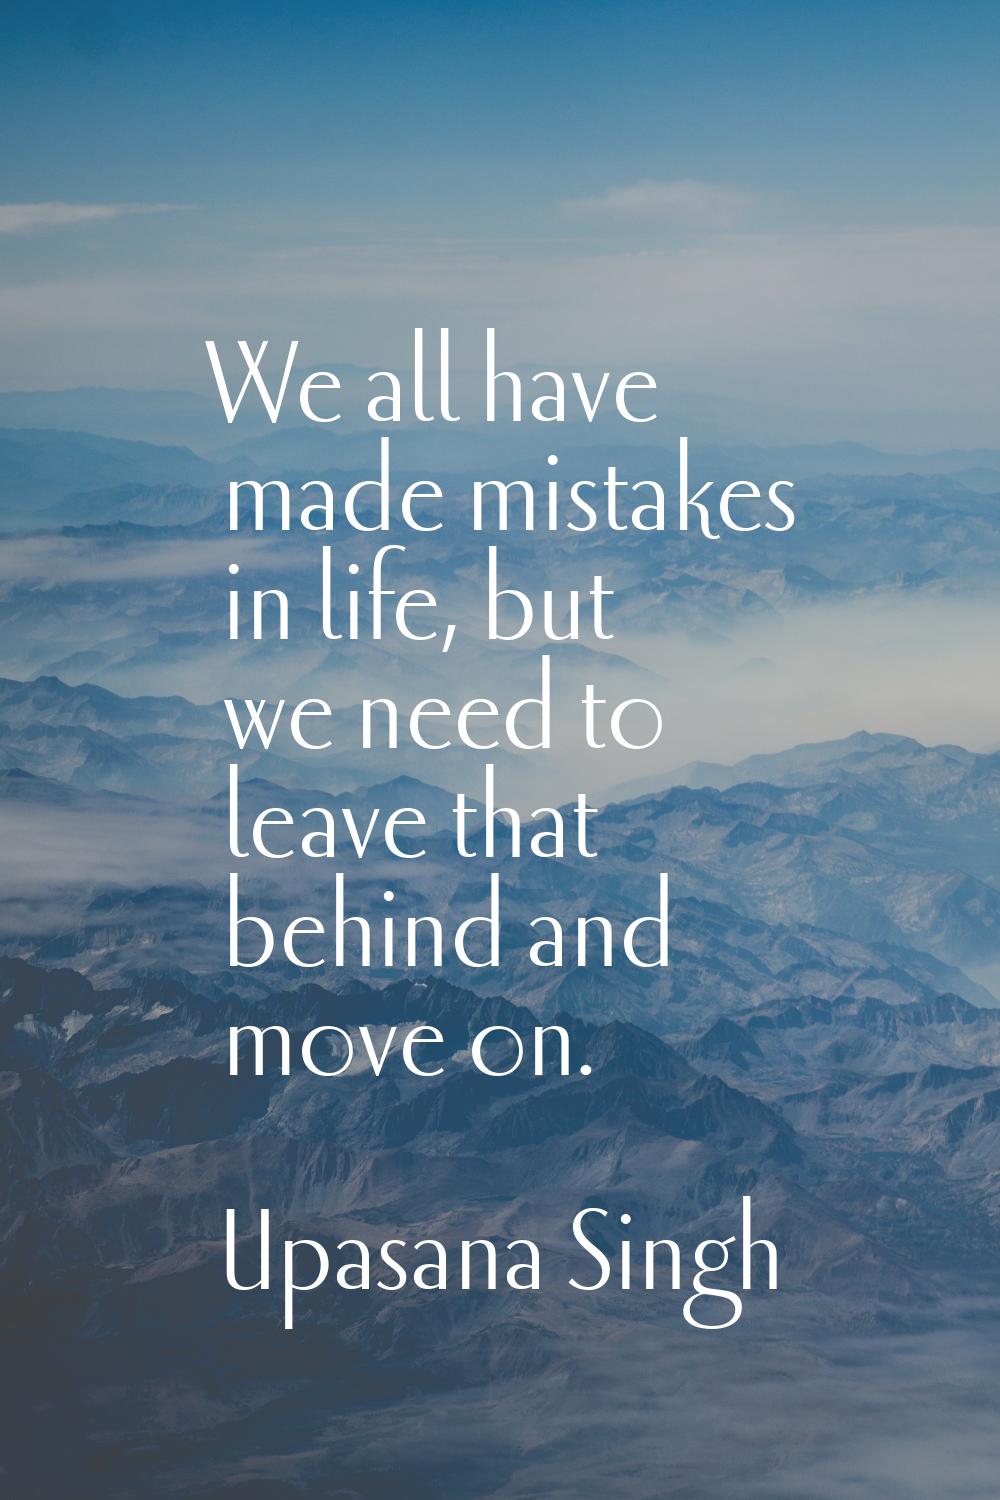 We all have made mistakes in life, but we need to leave that behind and move on.